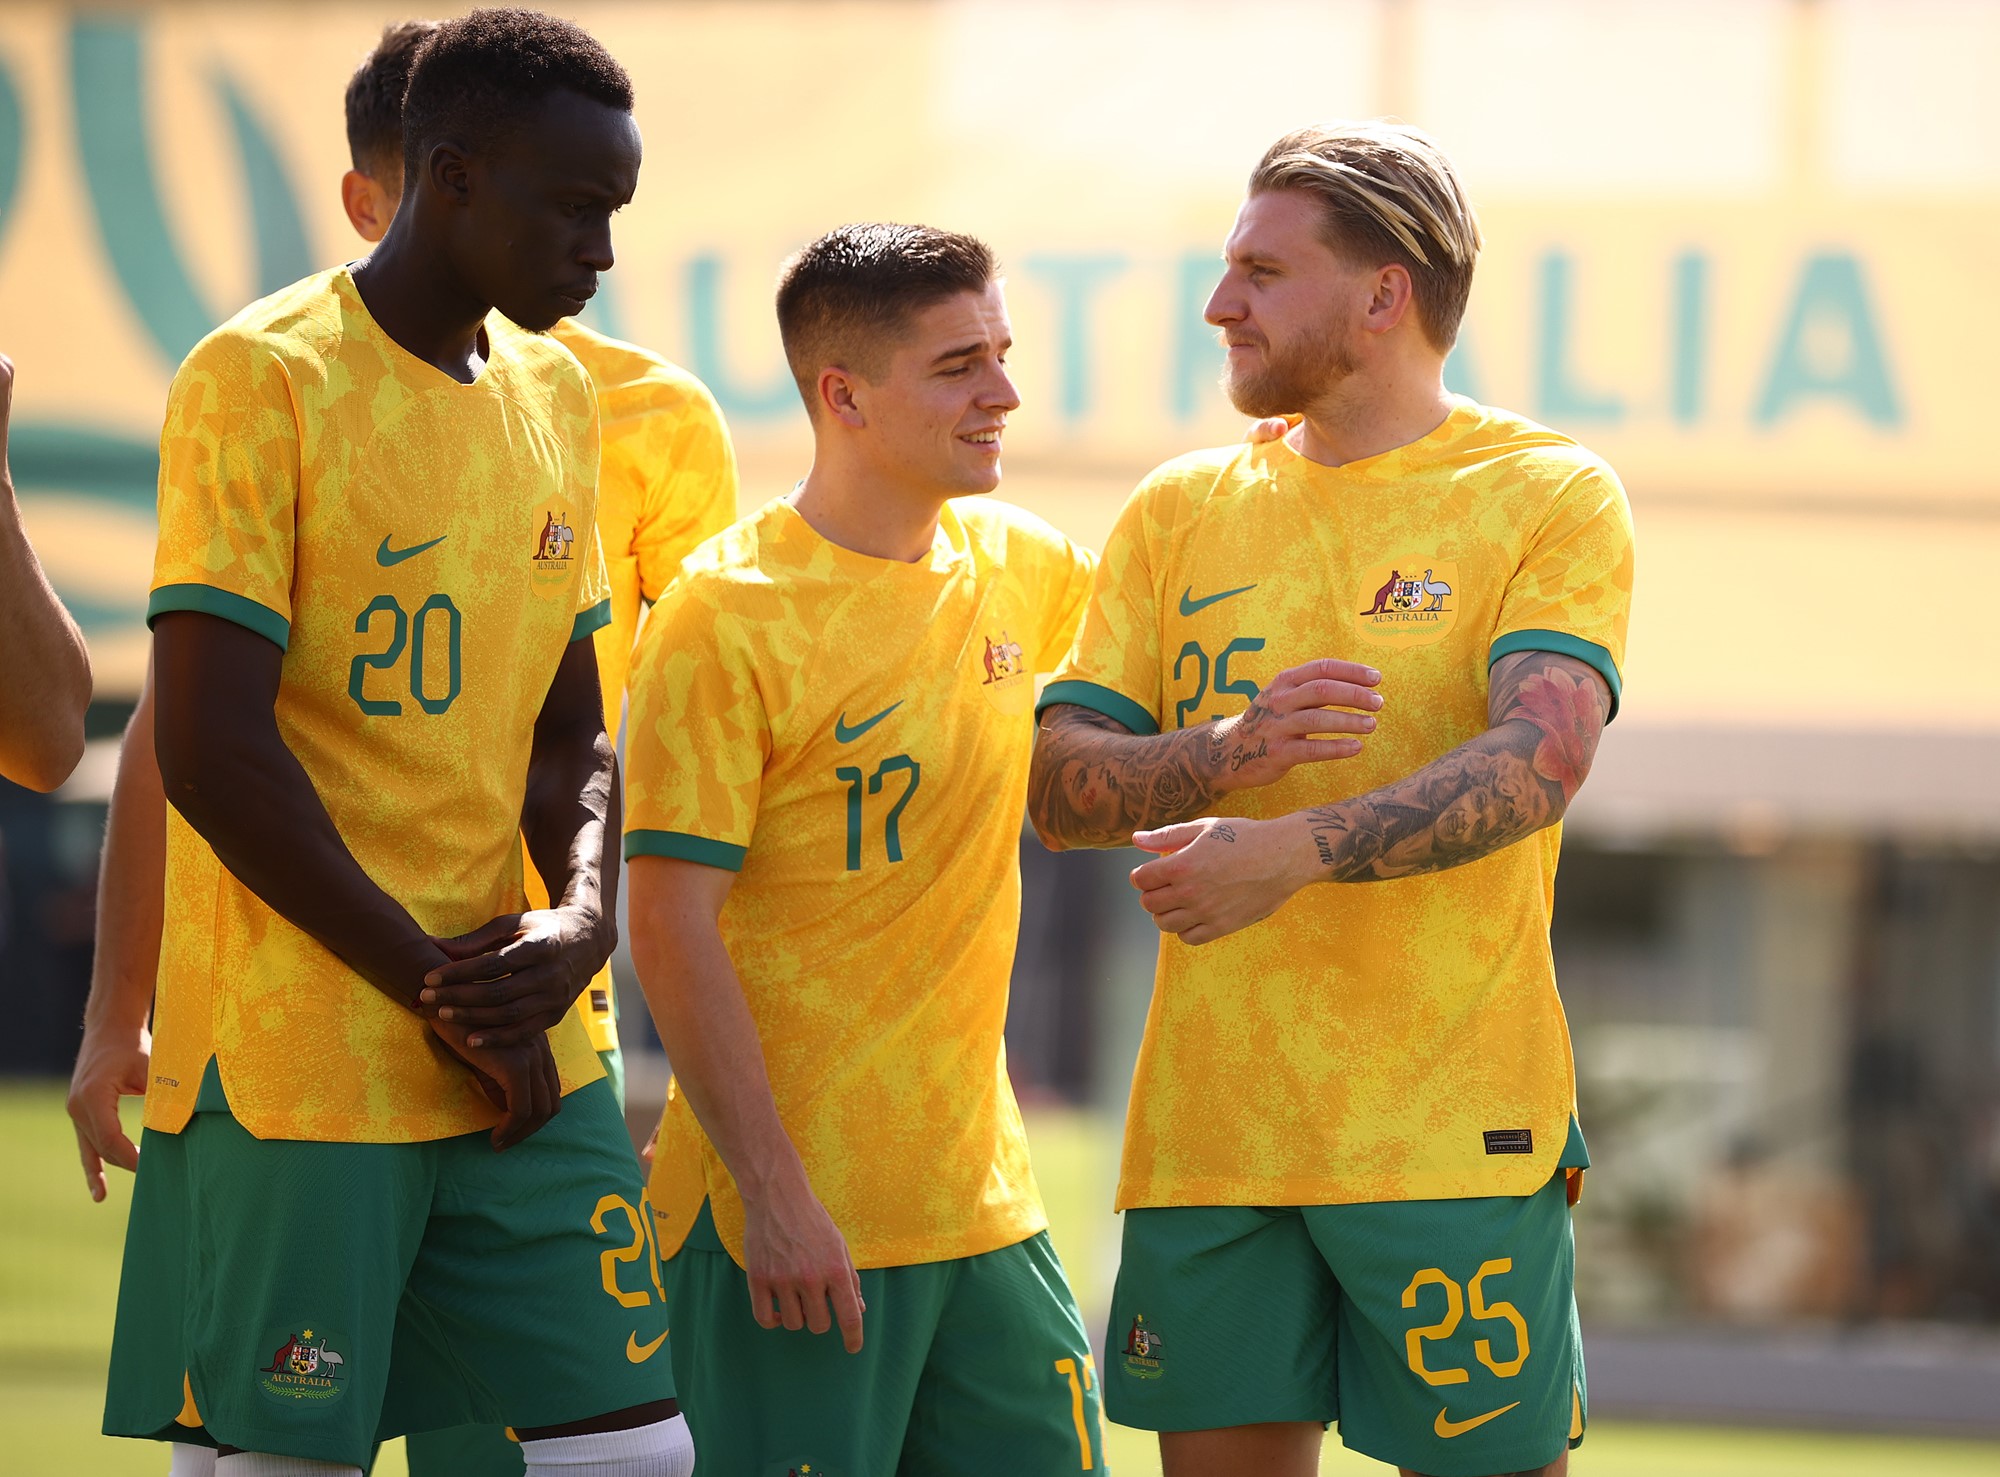 Three Socceroos players have a laugh